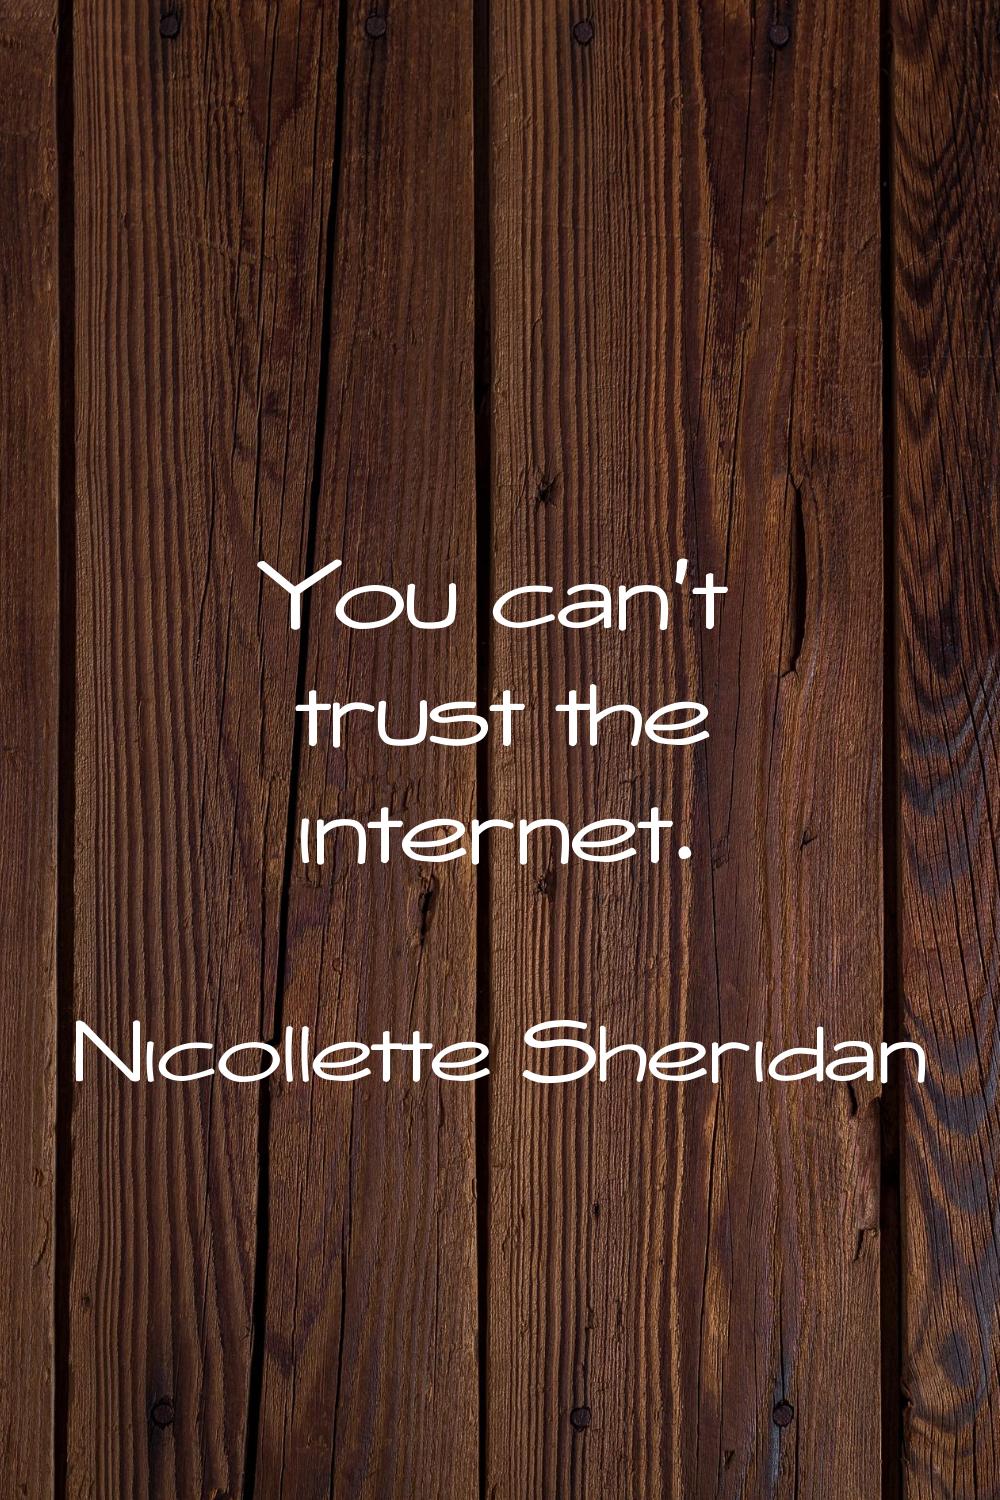 You can't trust the internet.